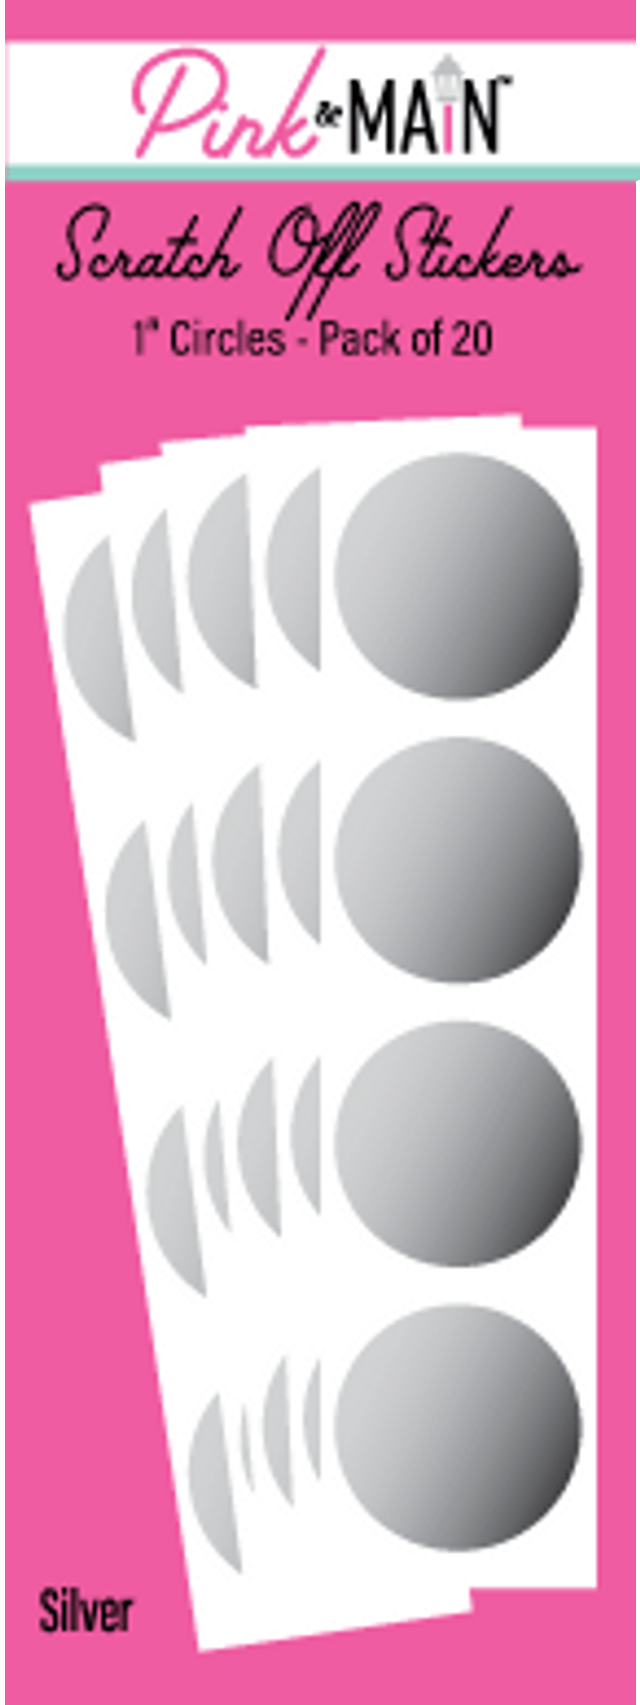 Pink & Main Silver 1" Circle Scratch Off Stickers